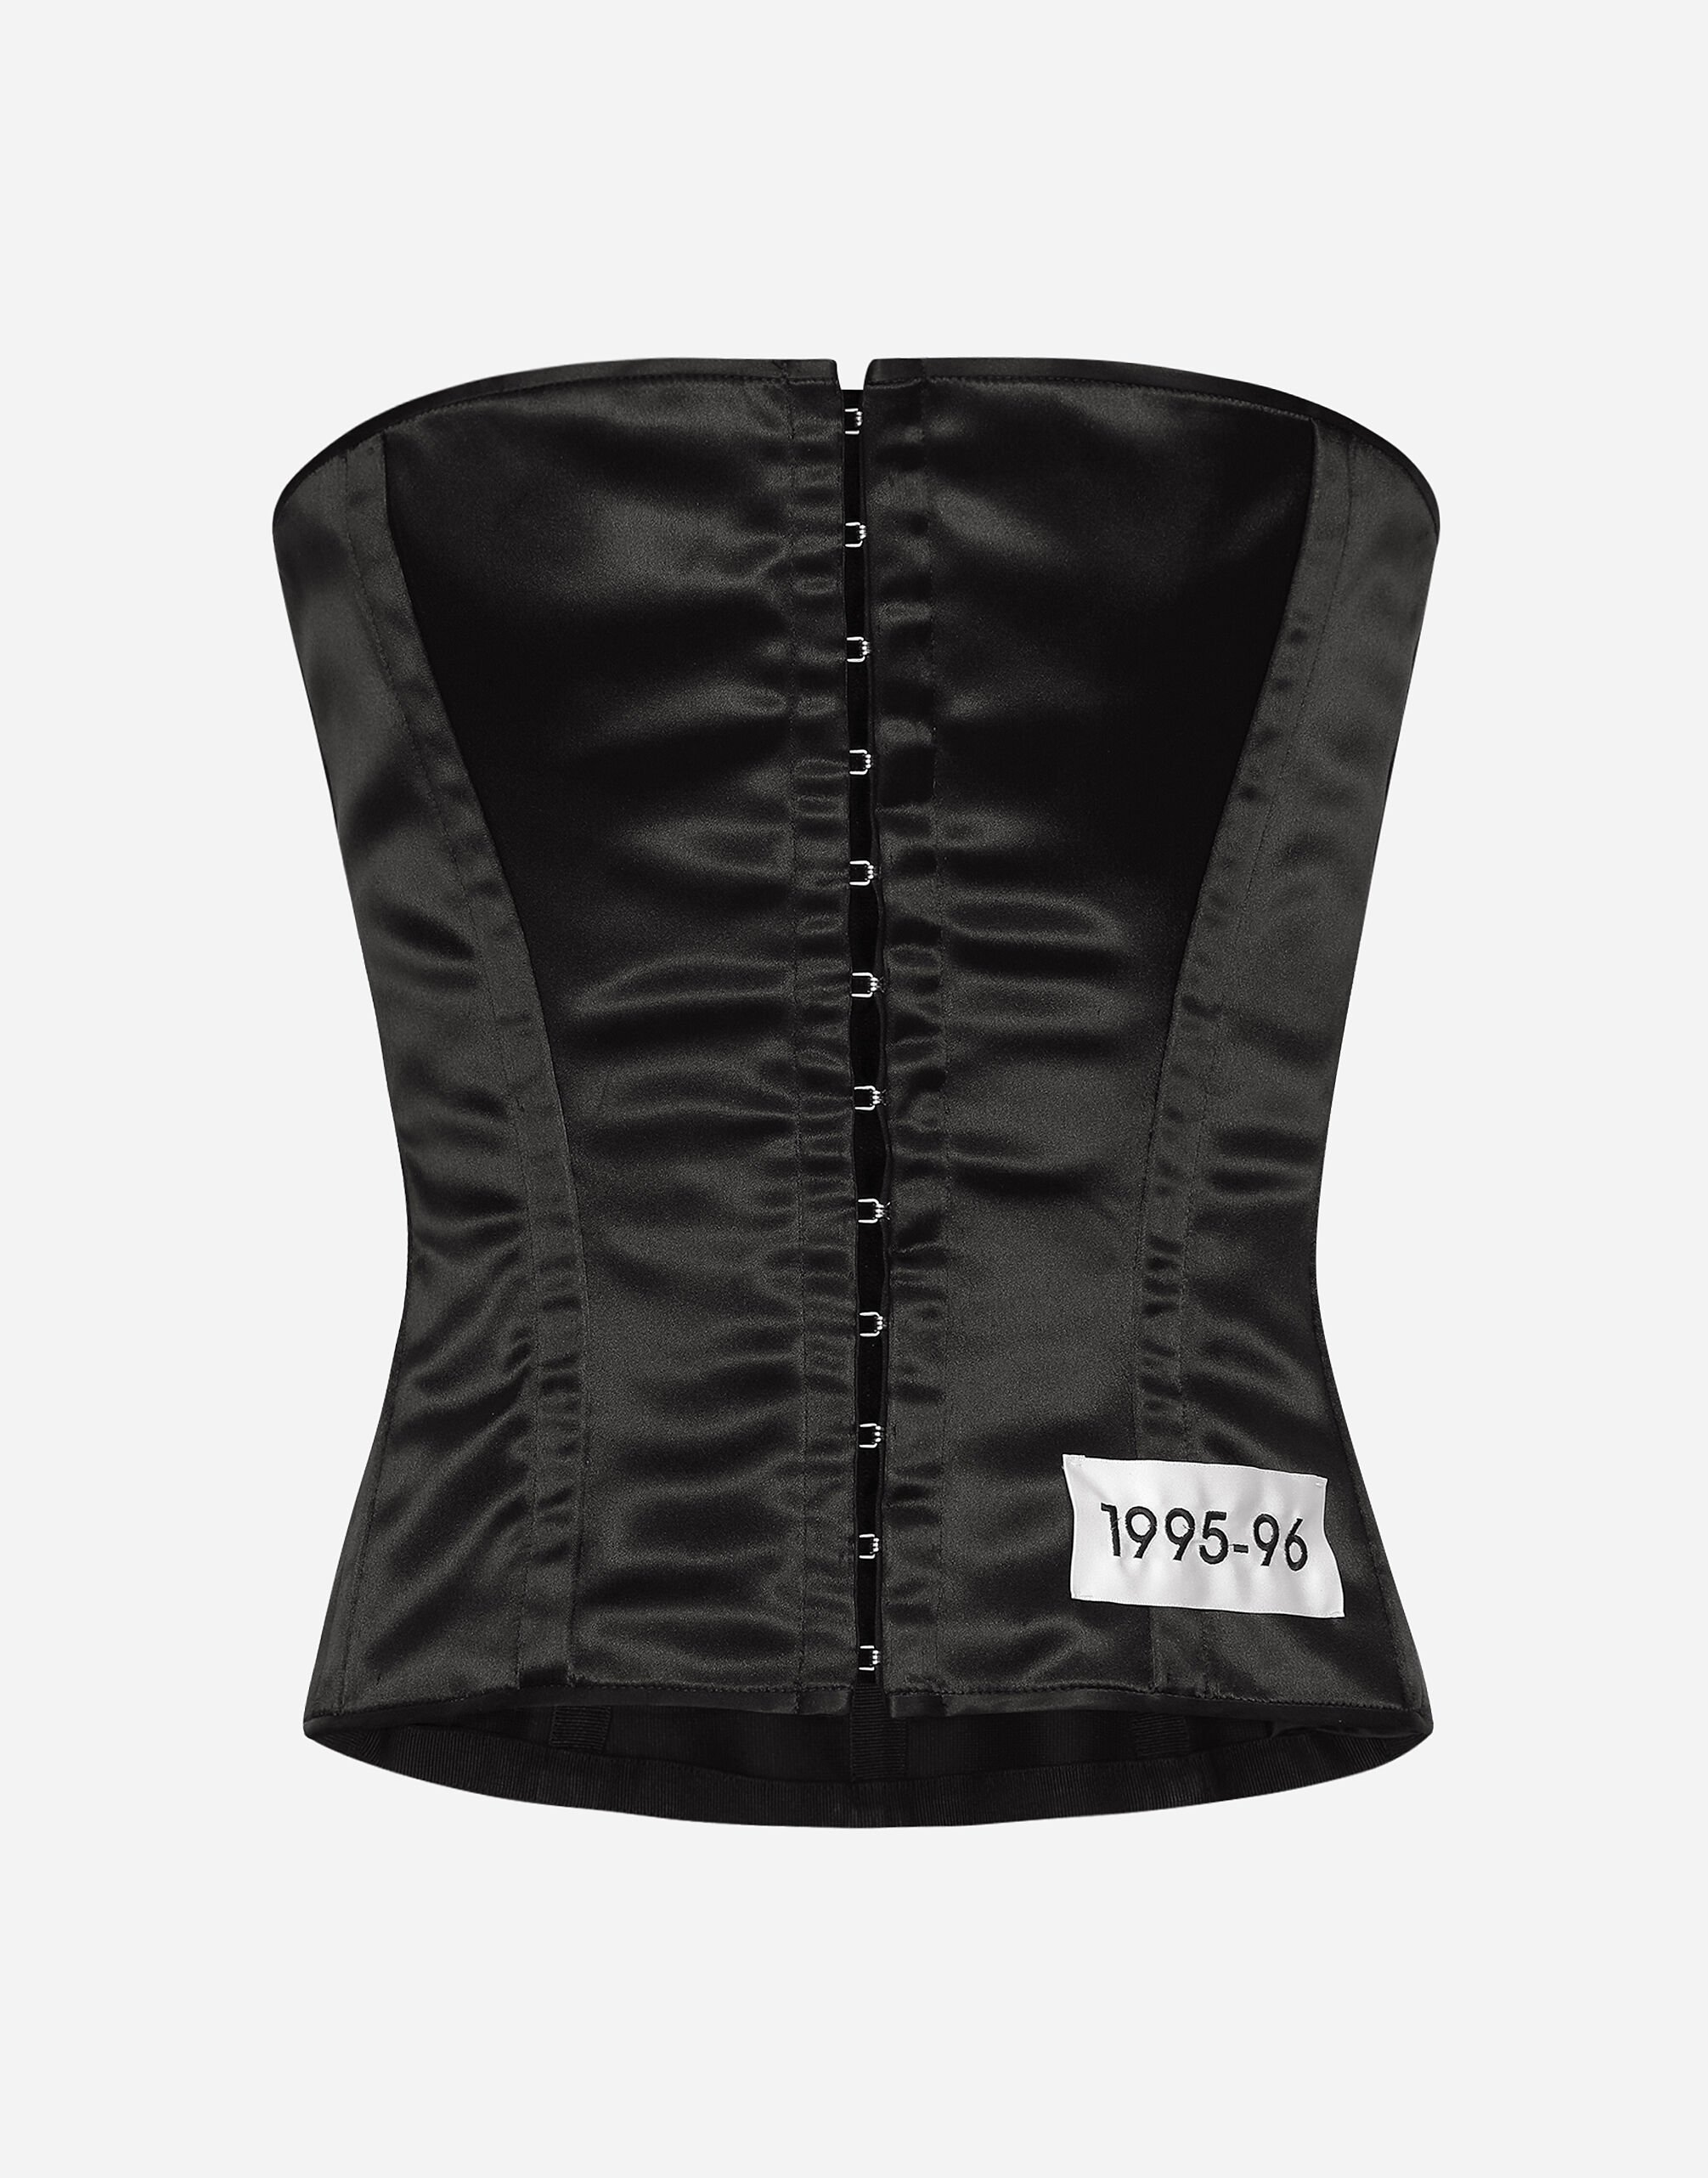 Dolce & Gabbana Corset with Re-Edition label Black VG6186VN187